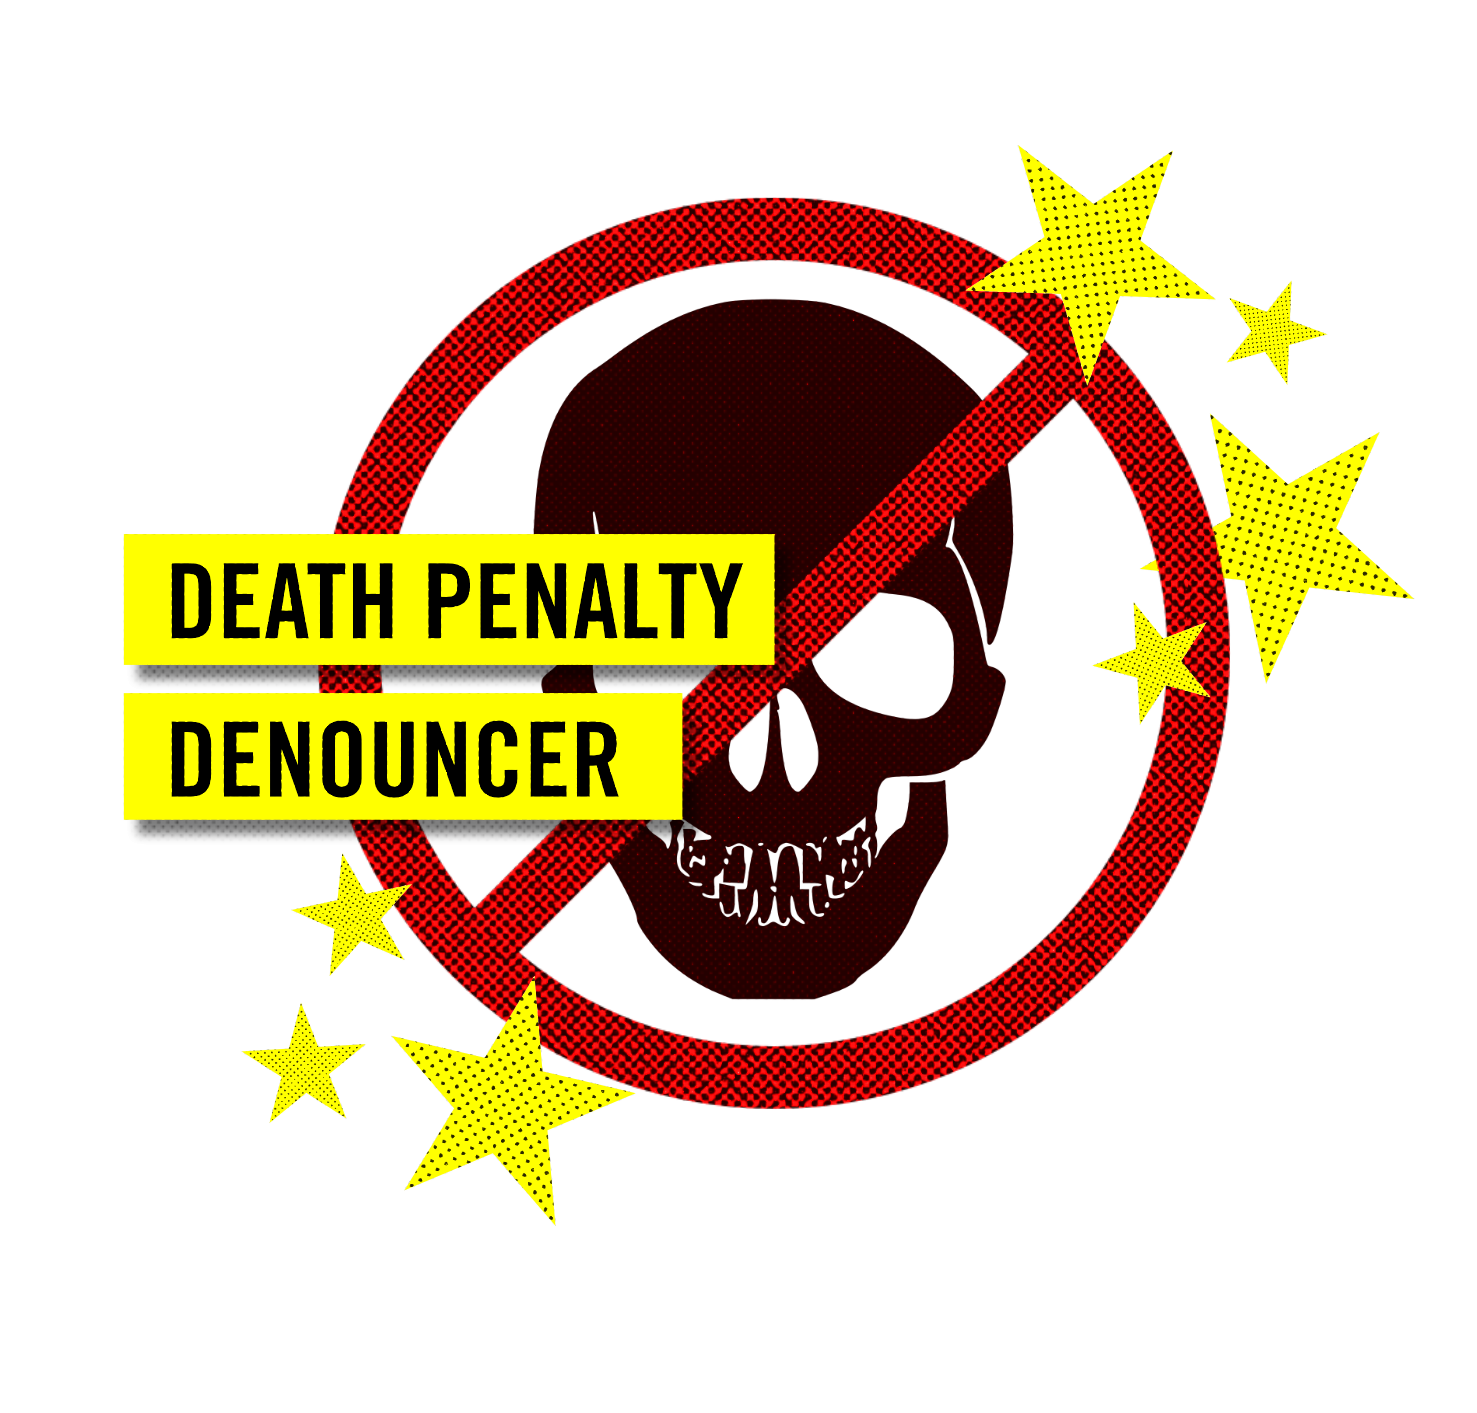 Or you could be a Death Penalty Denouncer, outraged by executions around the world skyrocketing to the highest level in the last five years, and raising a voice for those who face this cruel and inhuman punishment. Enough is enough: the death penalty must be abolished in every U.S. state and in all countries.